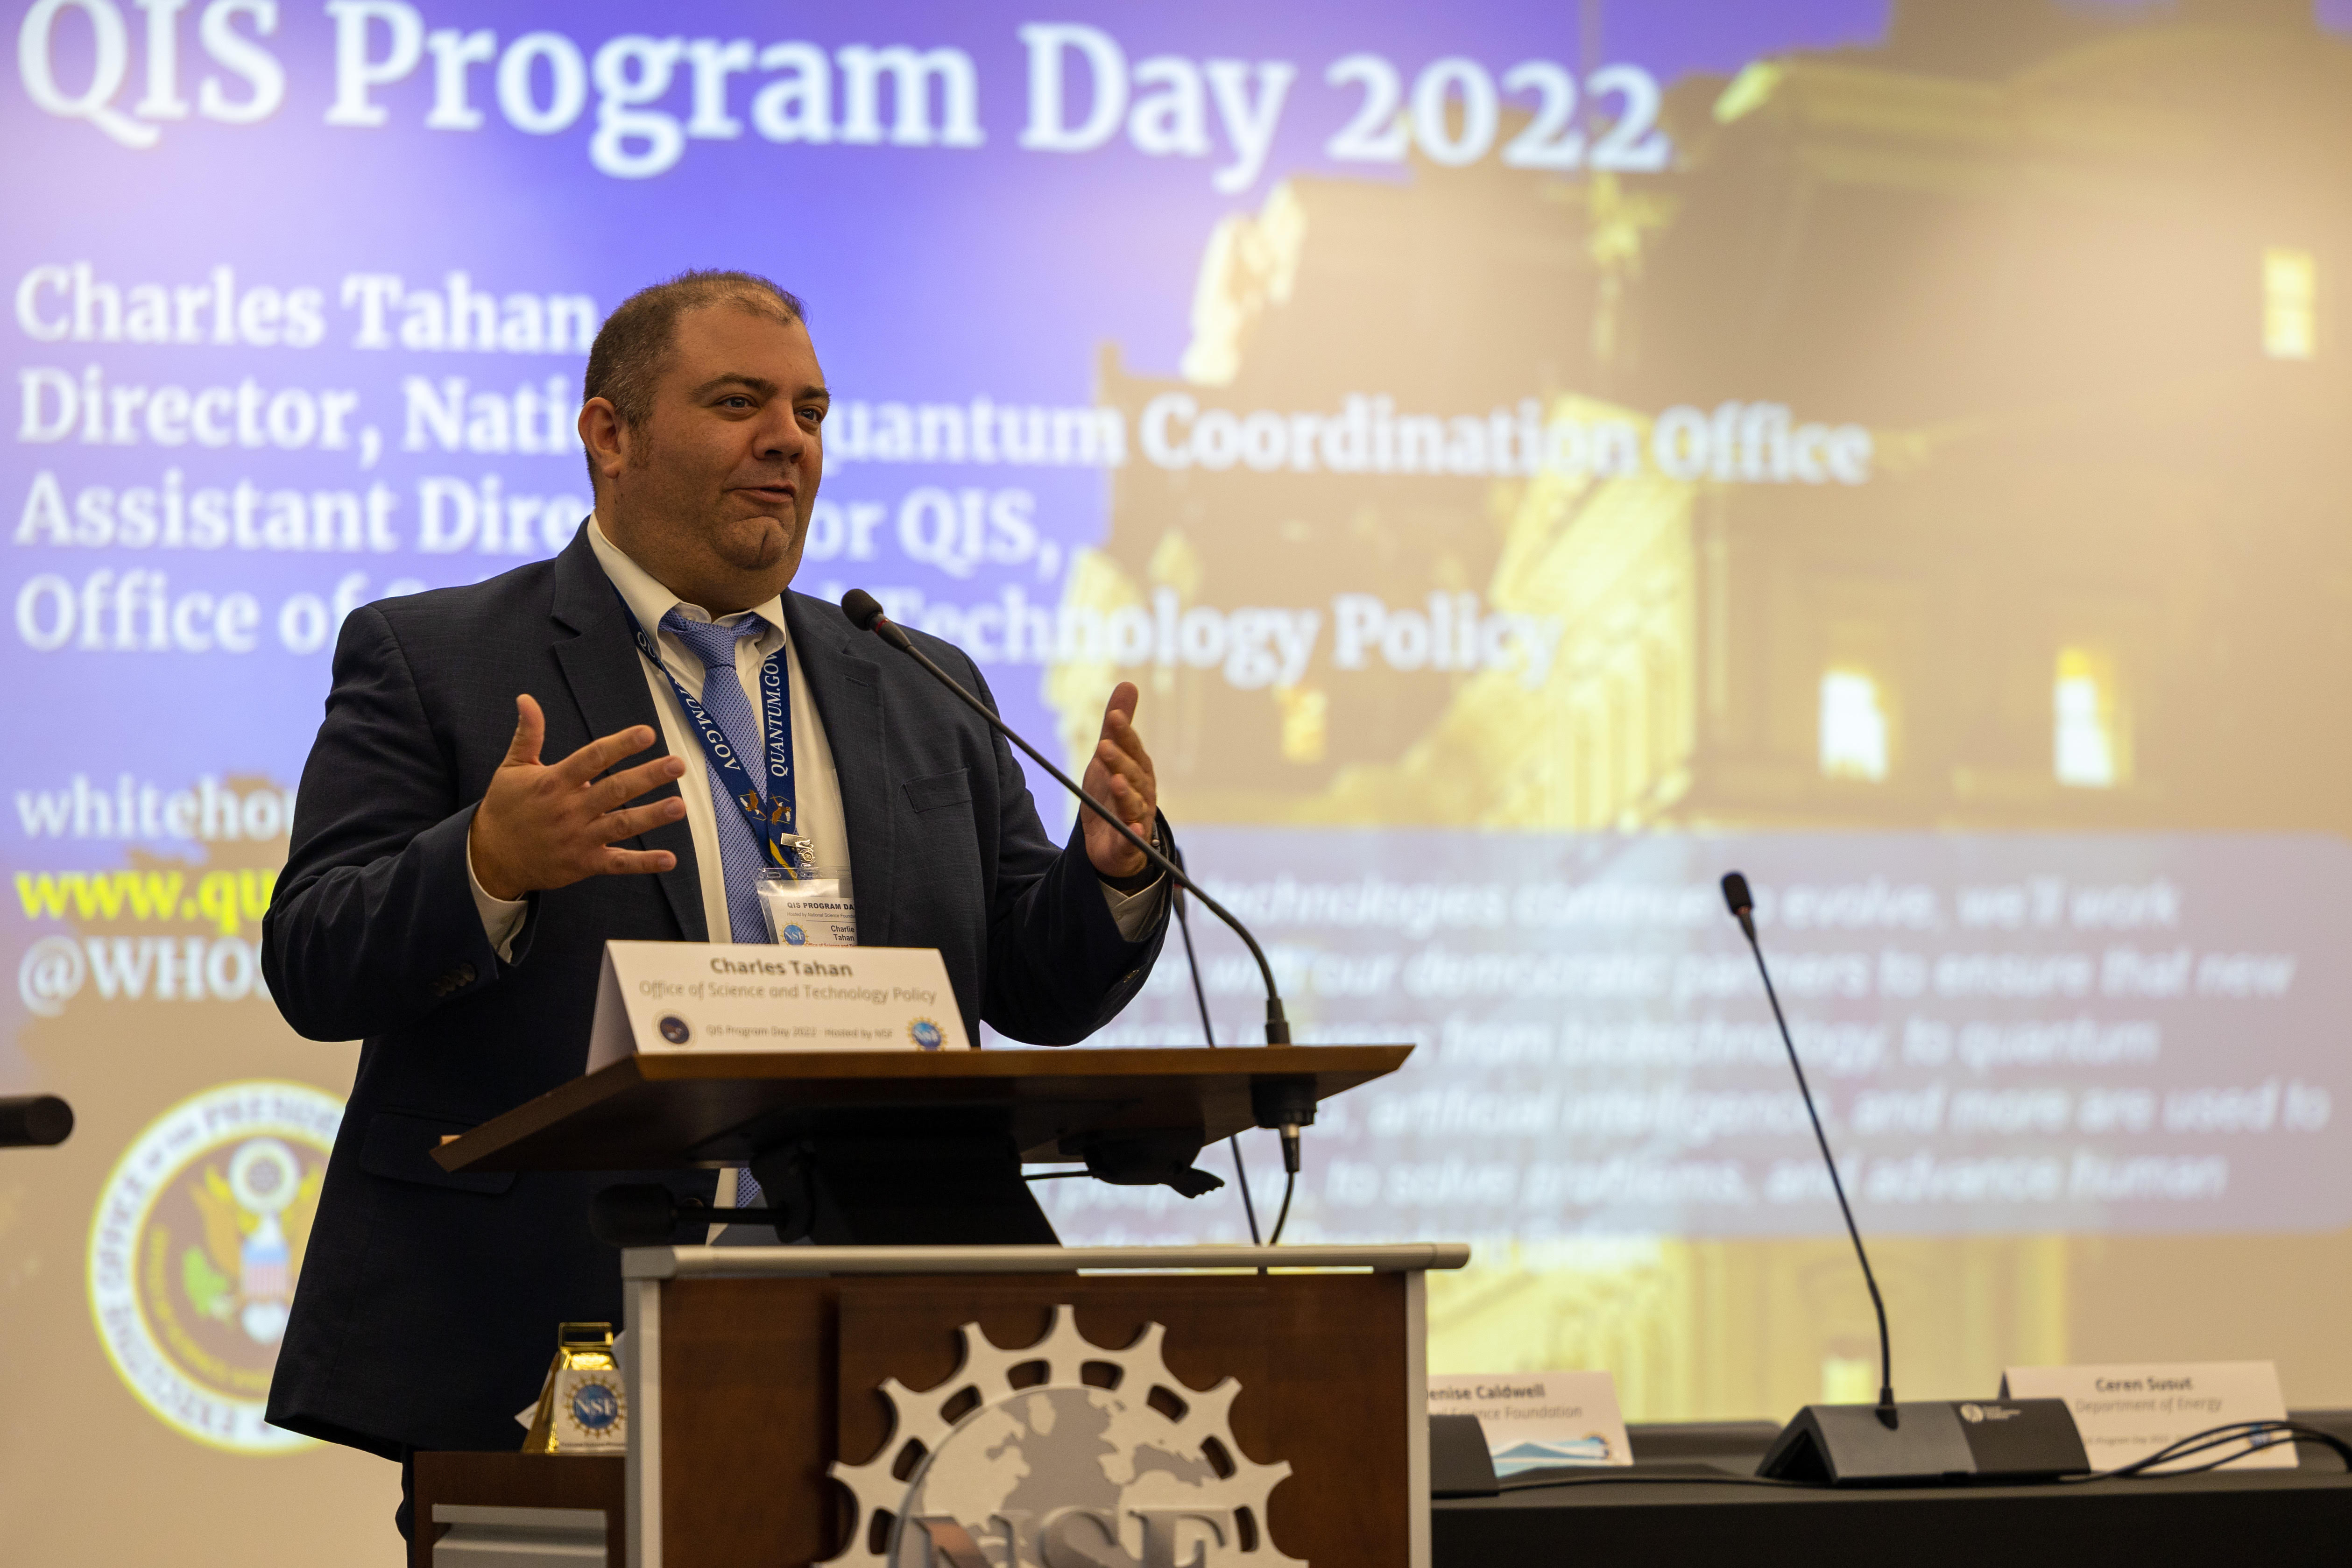 Charles Tahan in 2022 speaking at QIS Program Day, which is an annual gathering of quantum leaders from across the US Government.  Credit: National Quantum Coordination Office